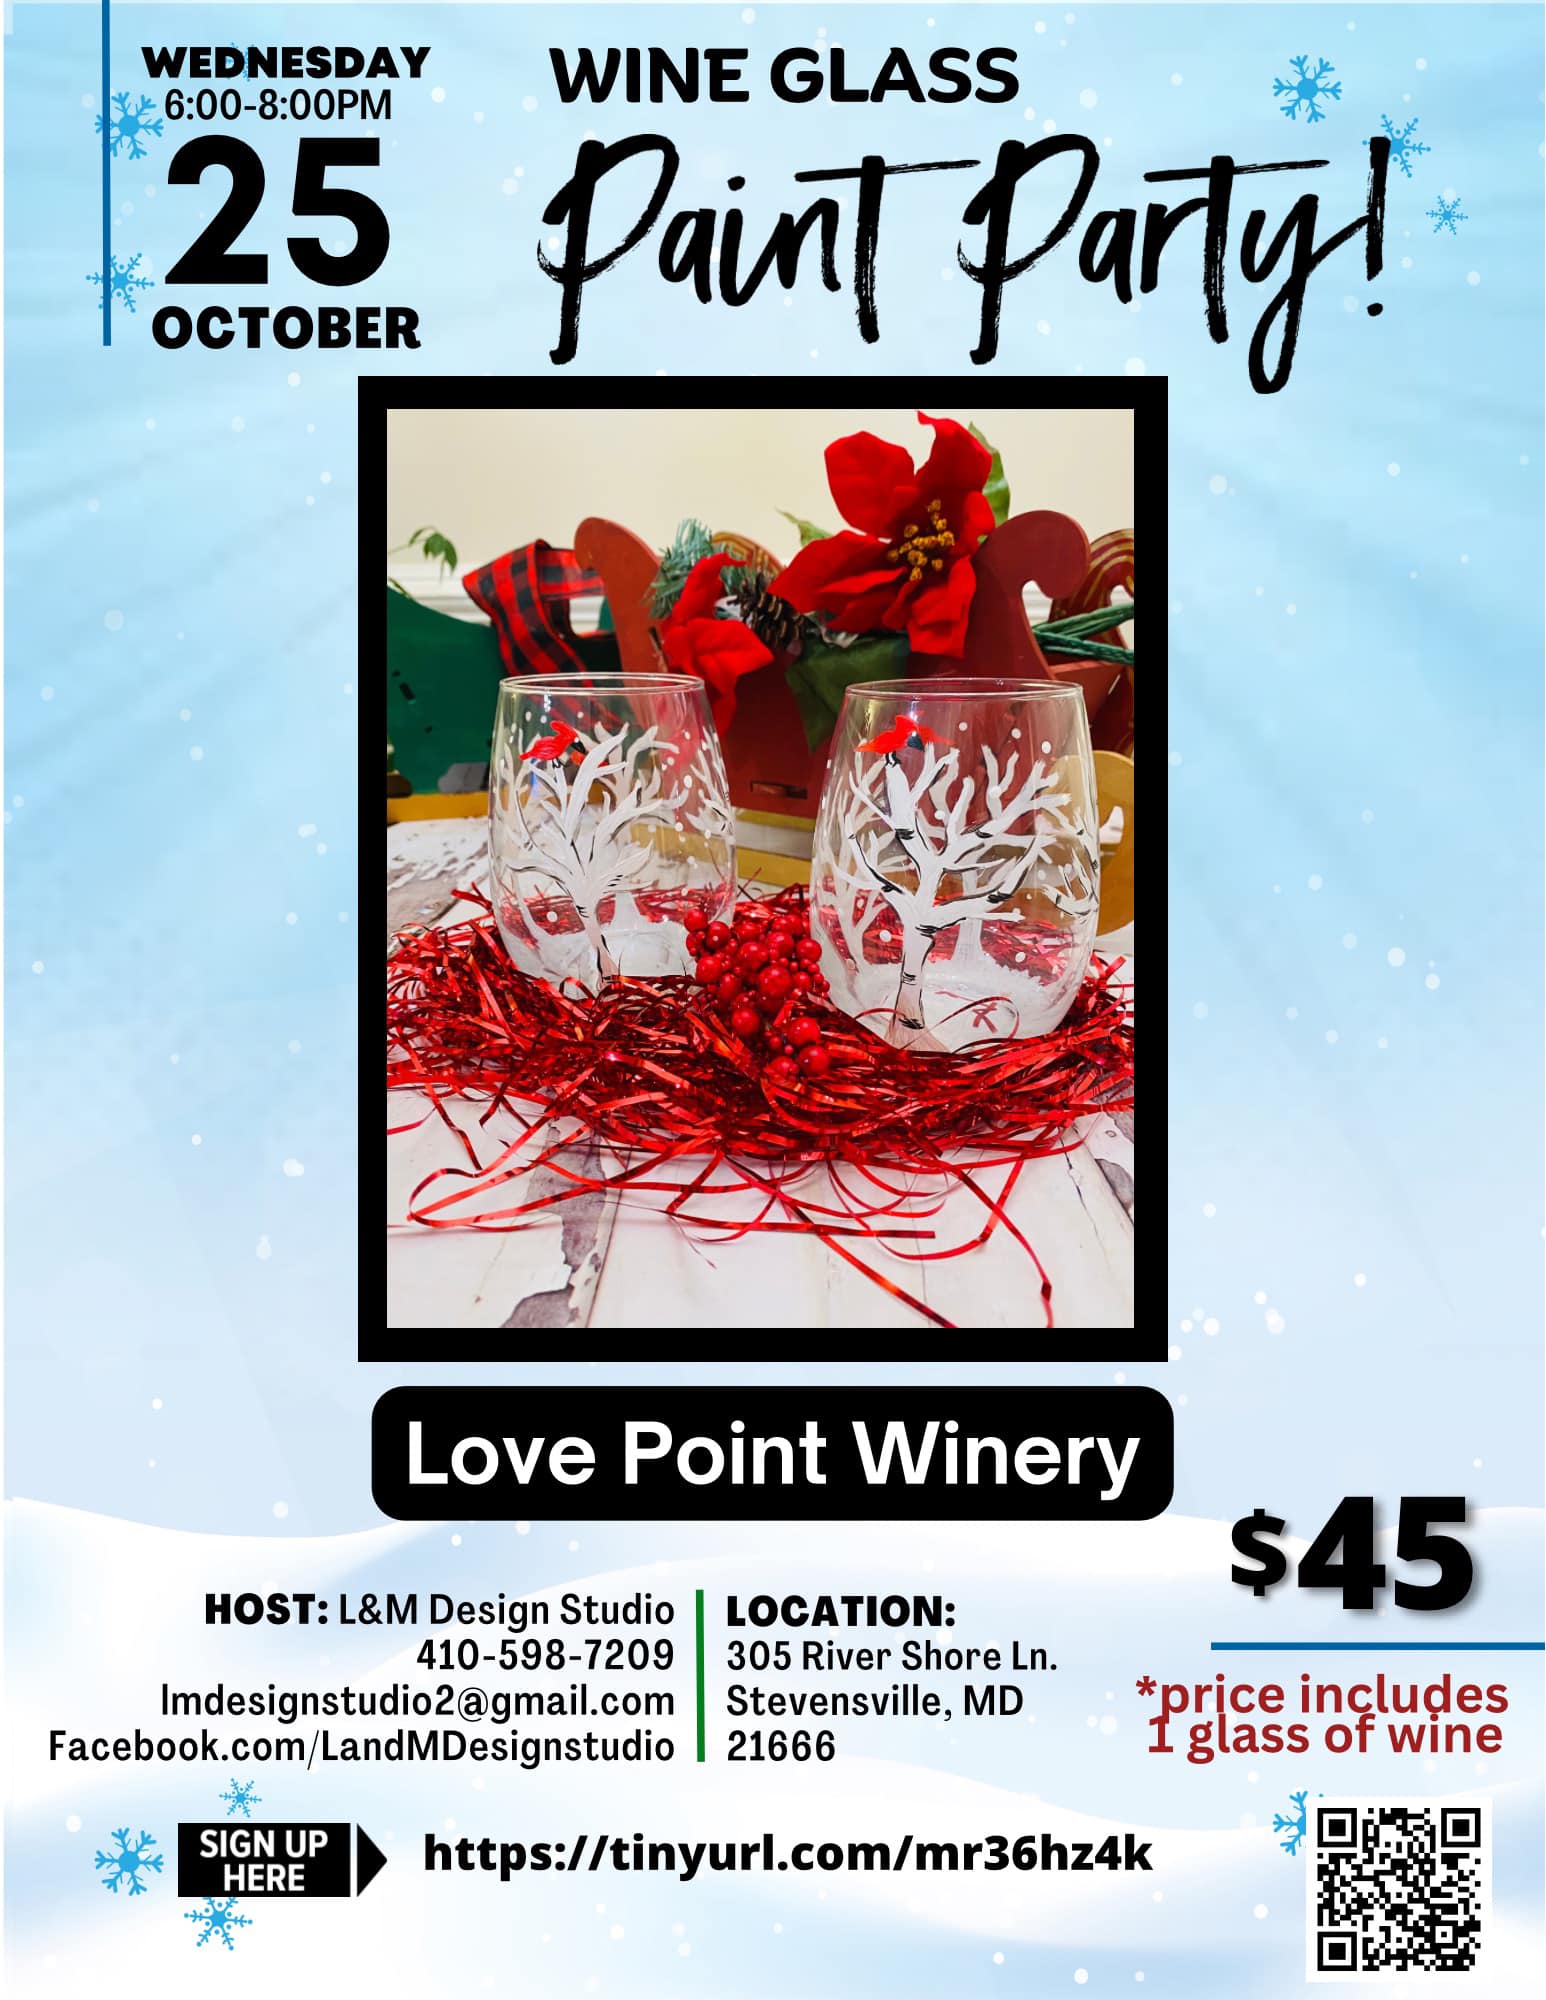 Wine Glass Paint Party